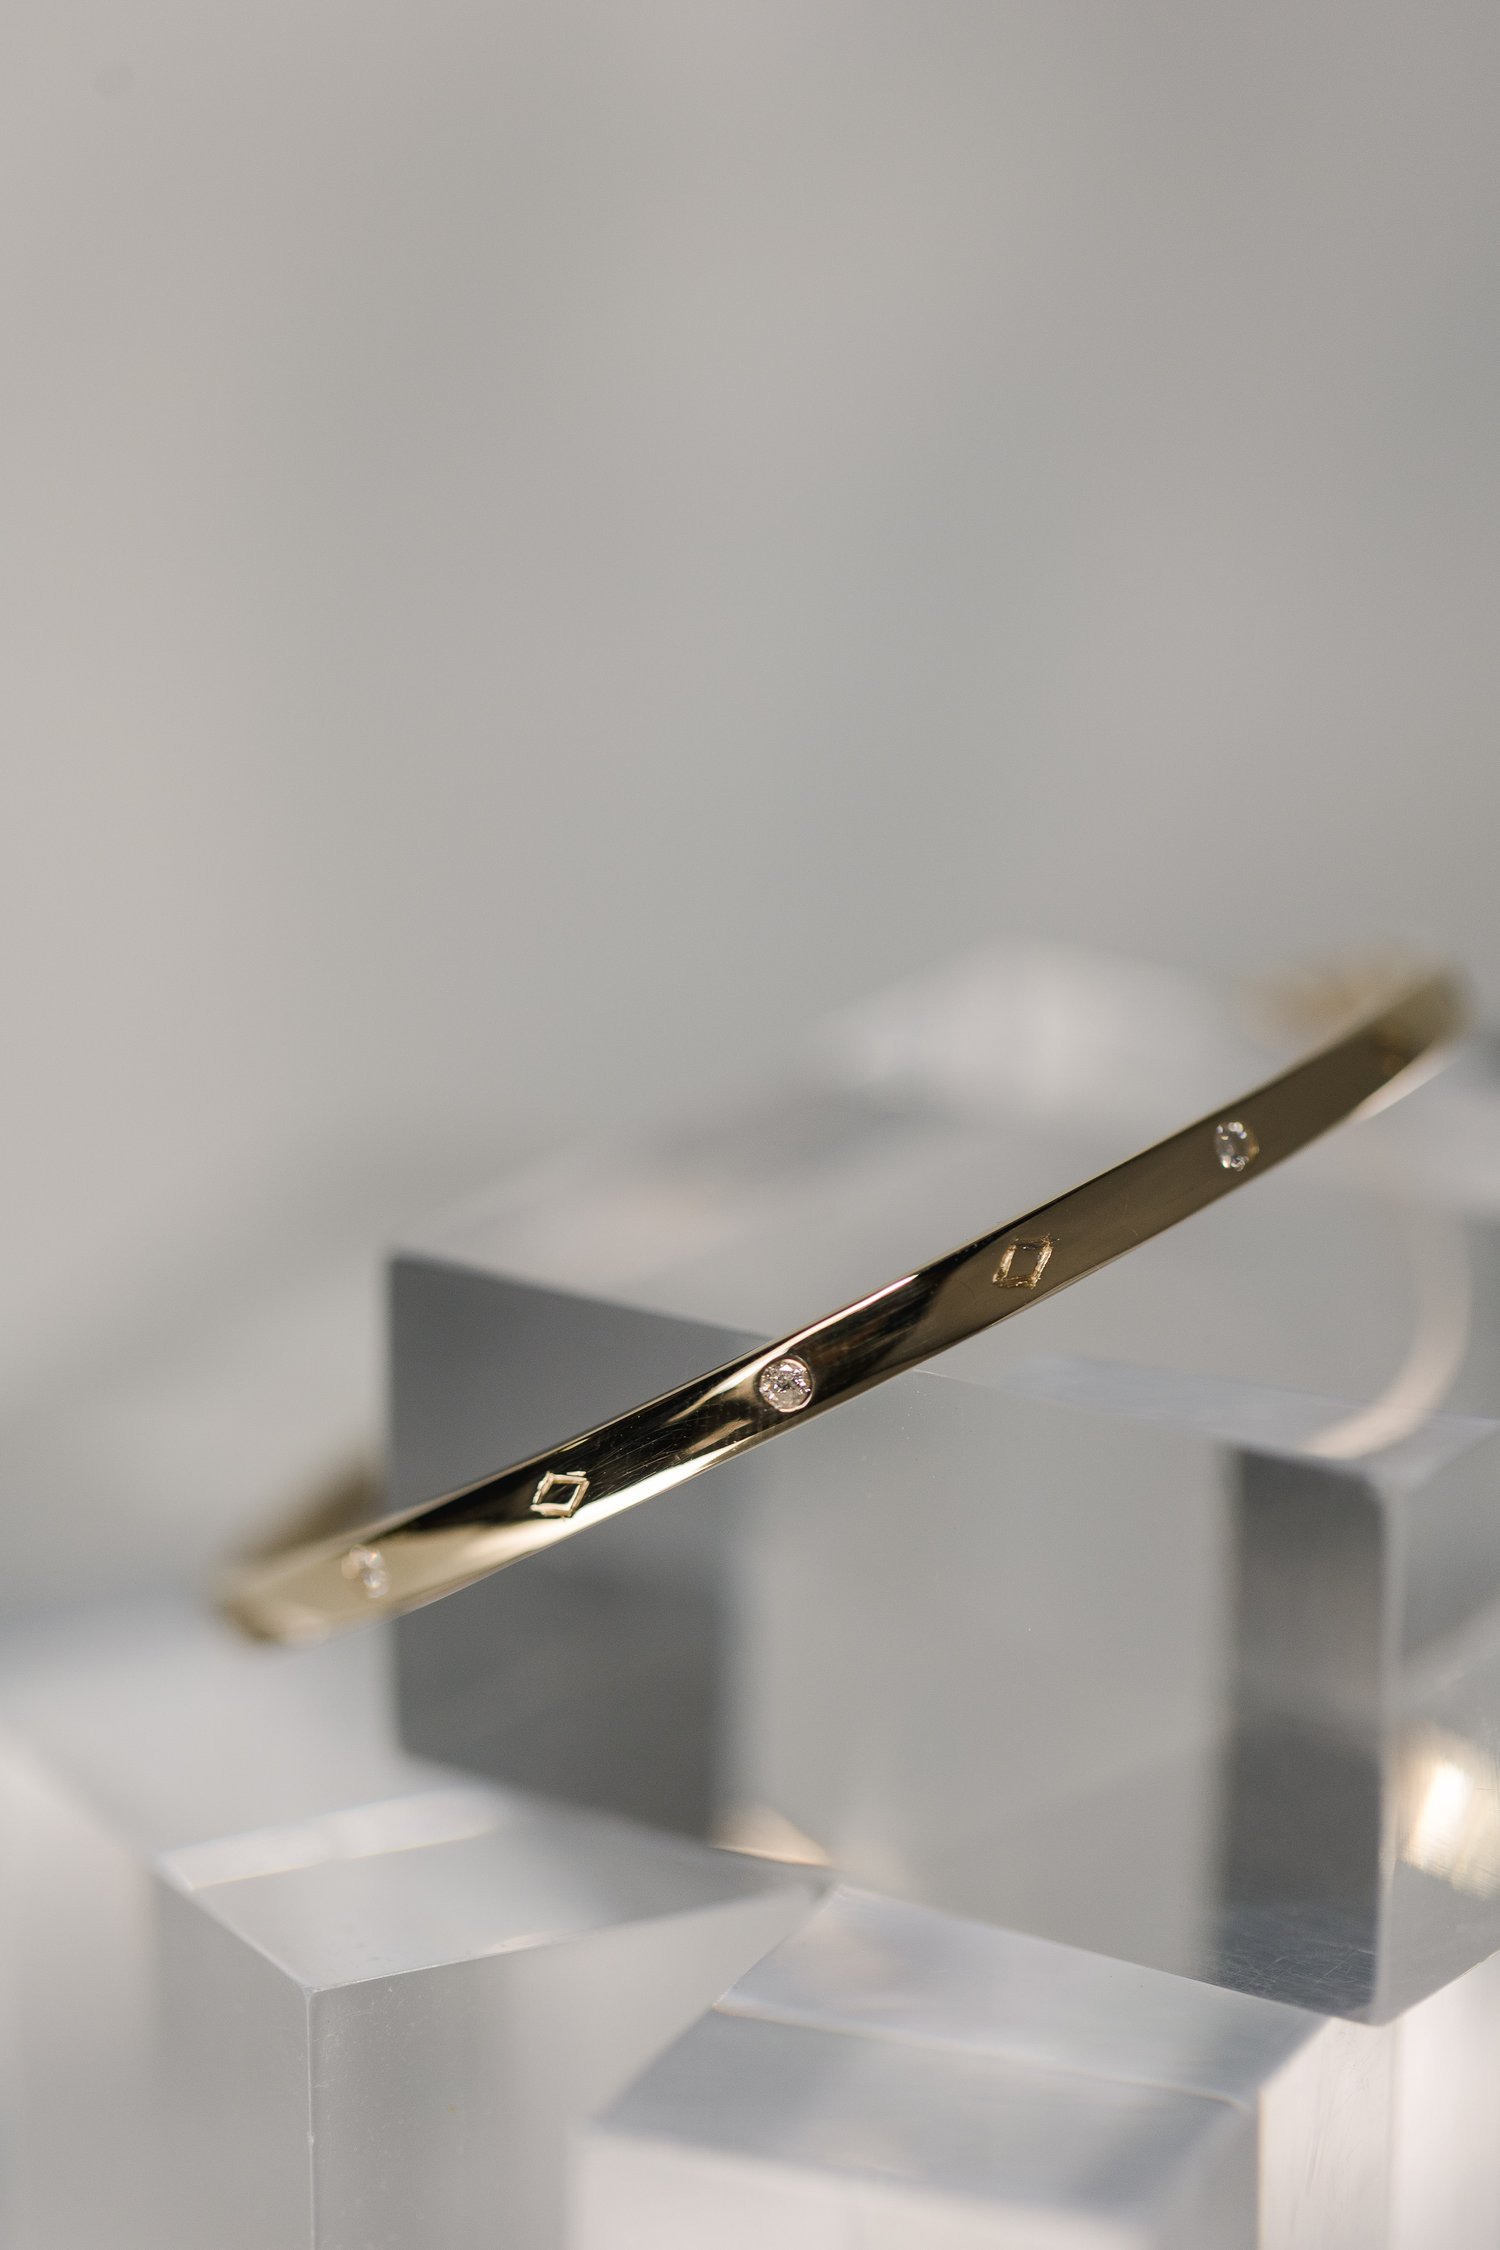 custom made recycled solid yellow gold bangle with engraving and diamonds designed by Alexandria &amp; Company fine jewelers